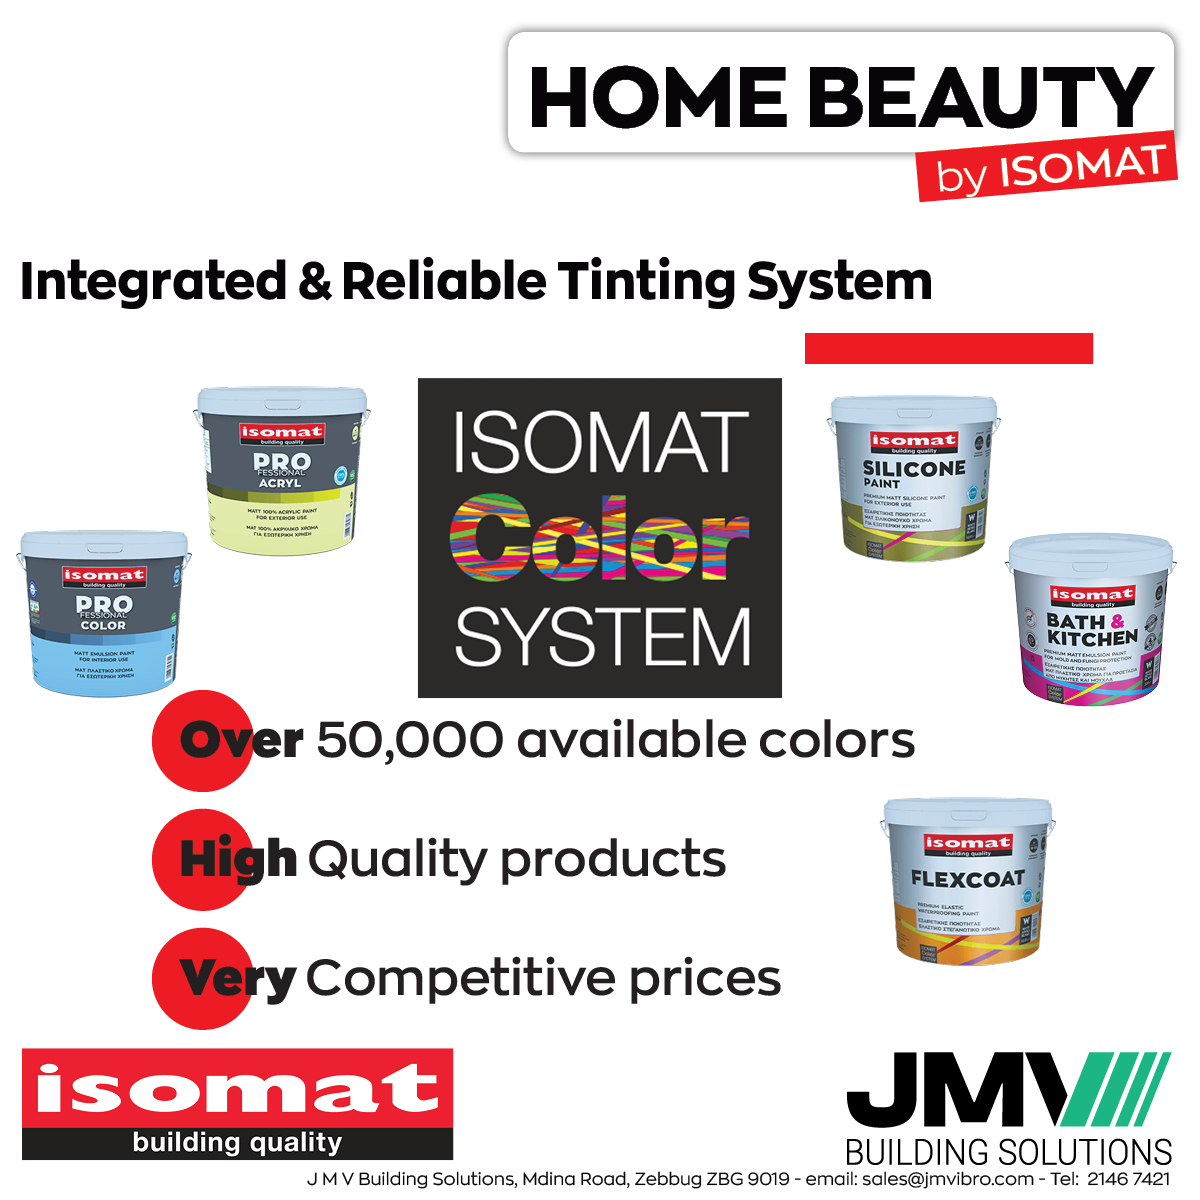 🎨 Introducing CHROMA: The Ultimate Colour Inspiration! 🌈✨
Unlock a world of captivating hues with ISOMAT's brand-new colour fan deck, CHROMA! 🎉 #CHROMA #ColourInspiration #EndlessPossibilities #JMVassalloVibroSteel #IsomatSolutions #JMVBuildingSolutions #ConstructionSolutions